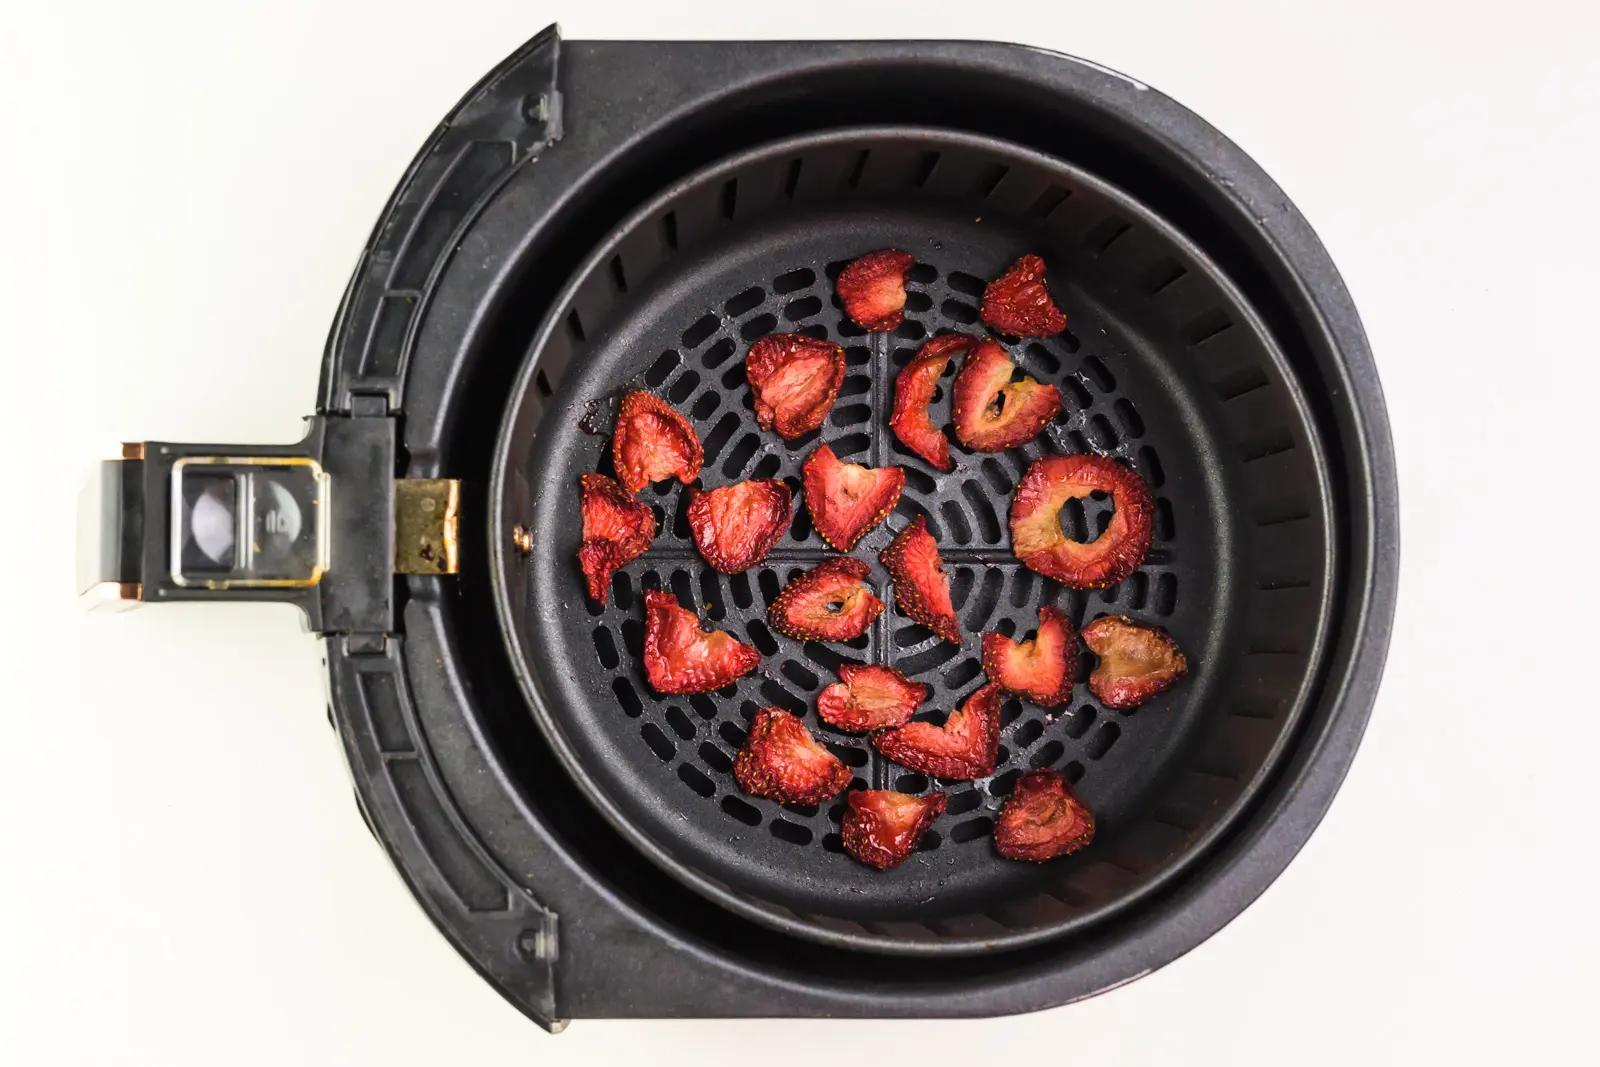 Dried strawberry slices are in the bottom of an air fryer basket.